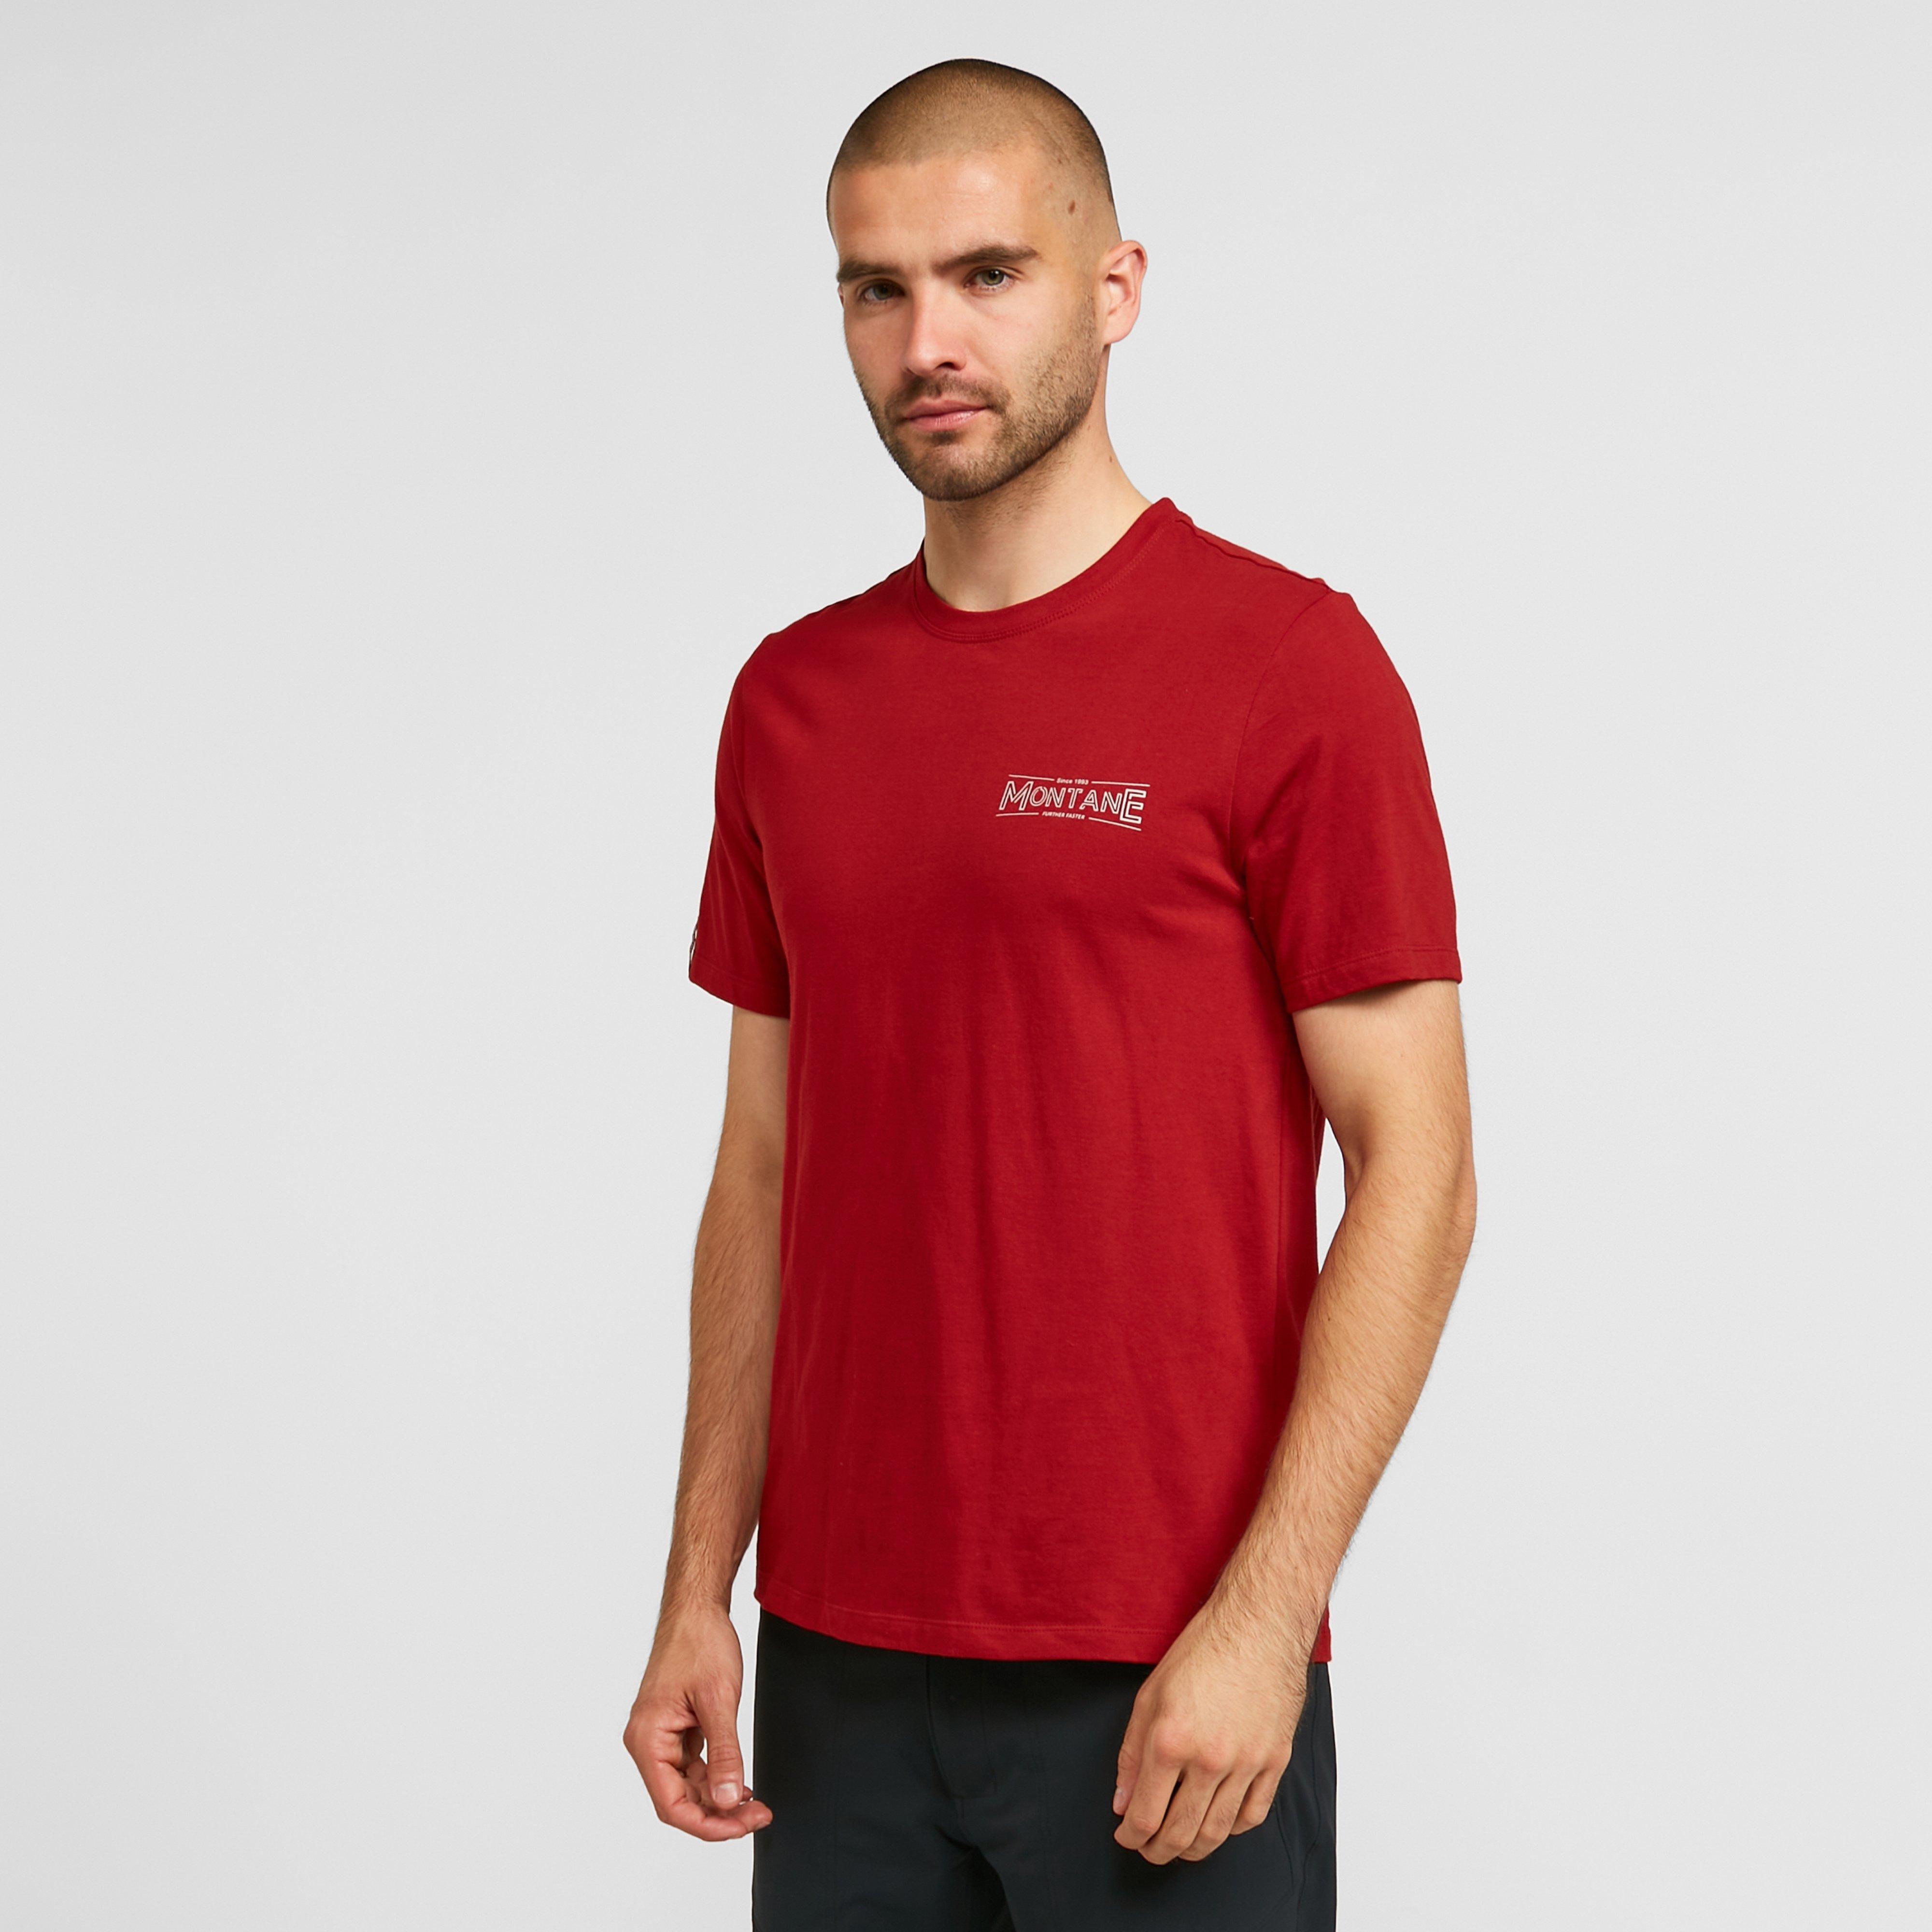 Montane Mens Trace T-shirt - Red/red  Red/red